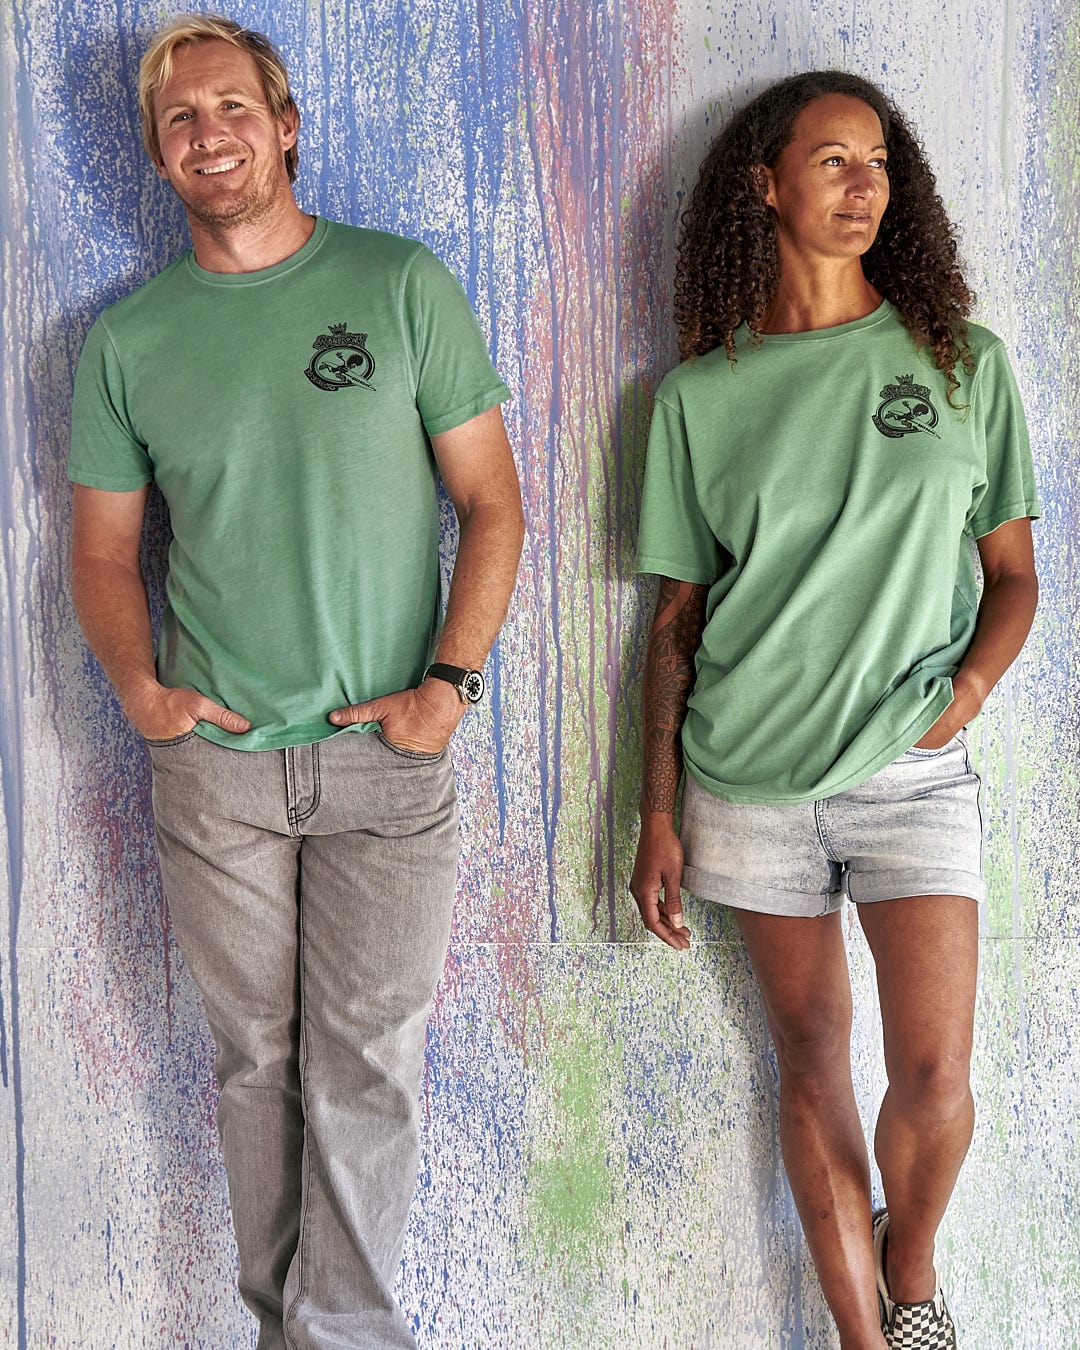 A man and woman standing next to each other wearing Saltrock's Little Creatures - Limited Edition 35 Years T-Shirts in green.